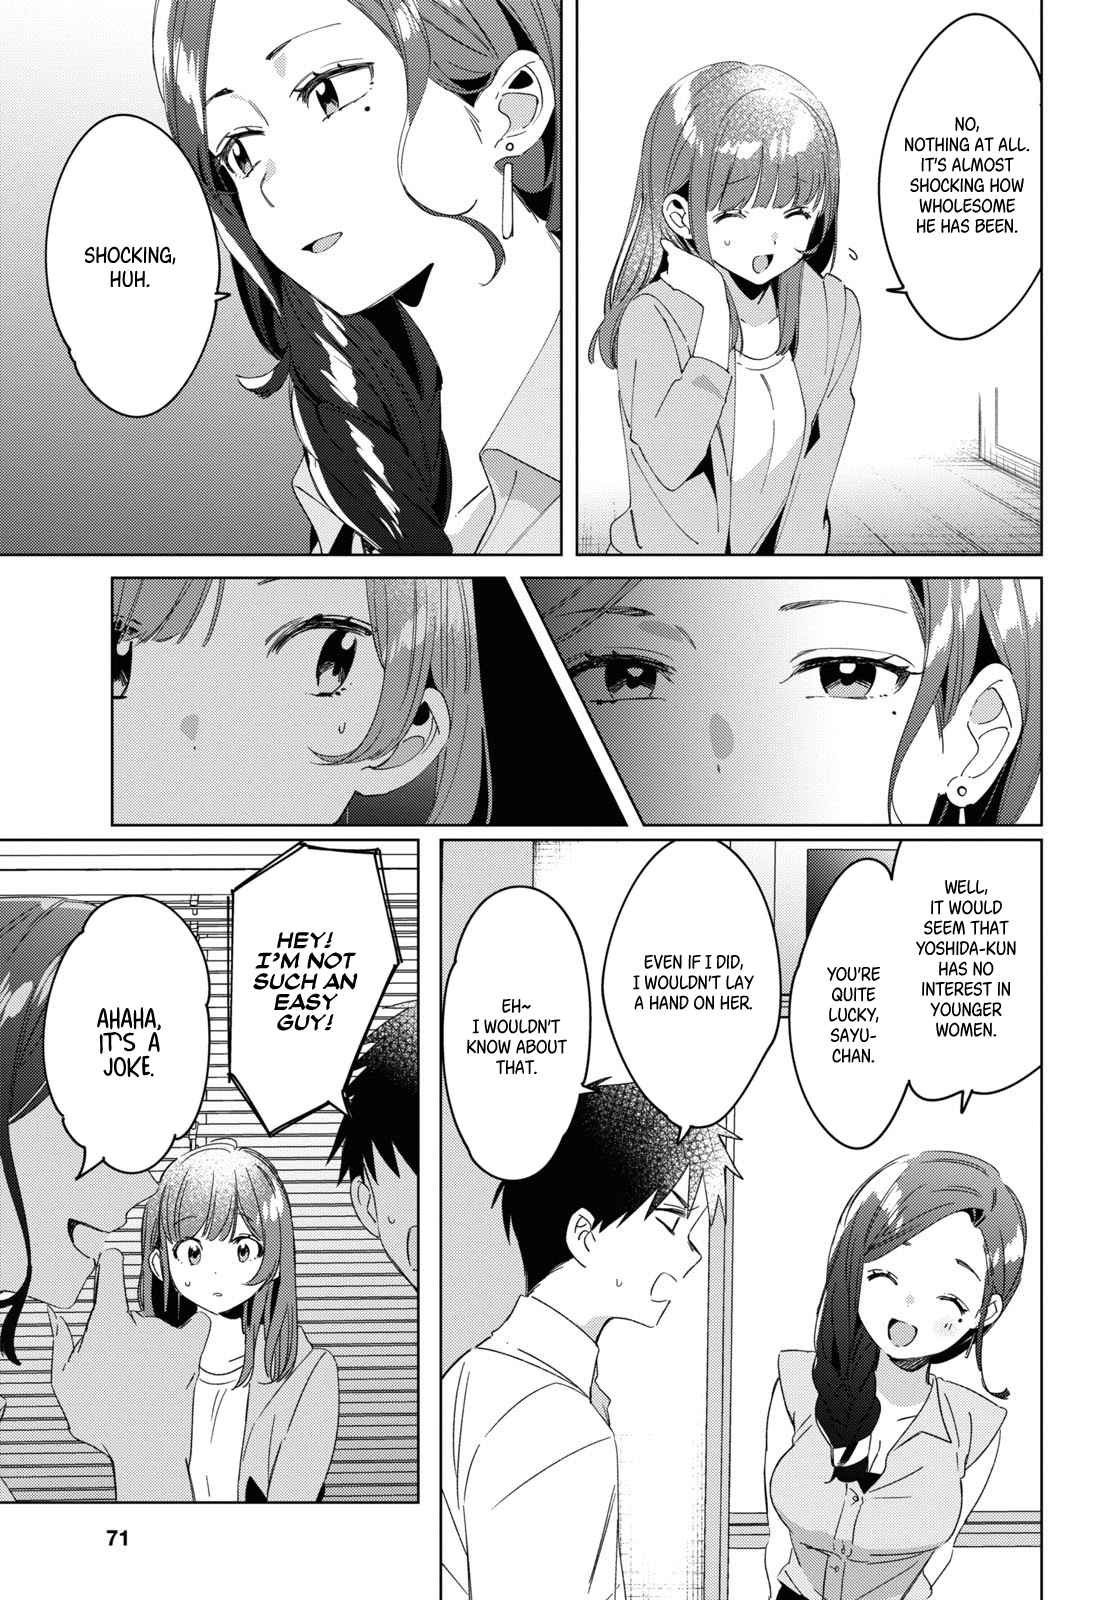 I Shaved. Then I Brought a High School Girl Home. Ch. 15